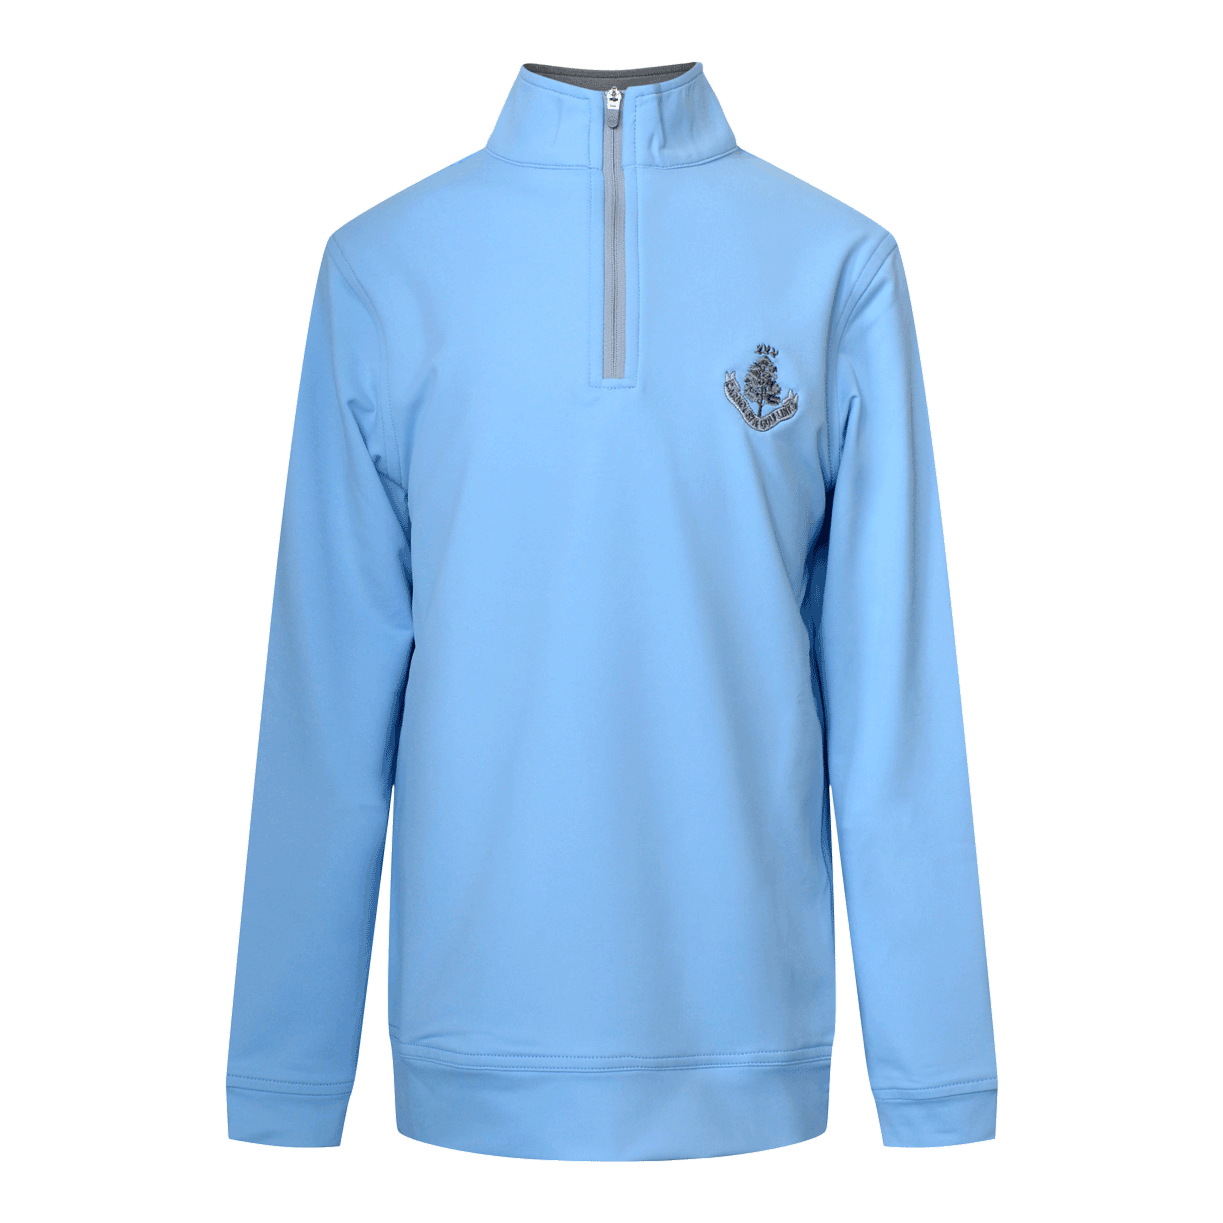 Youth Perth Performance 1/4 Zip - Cottage Blue